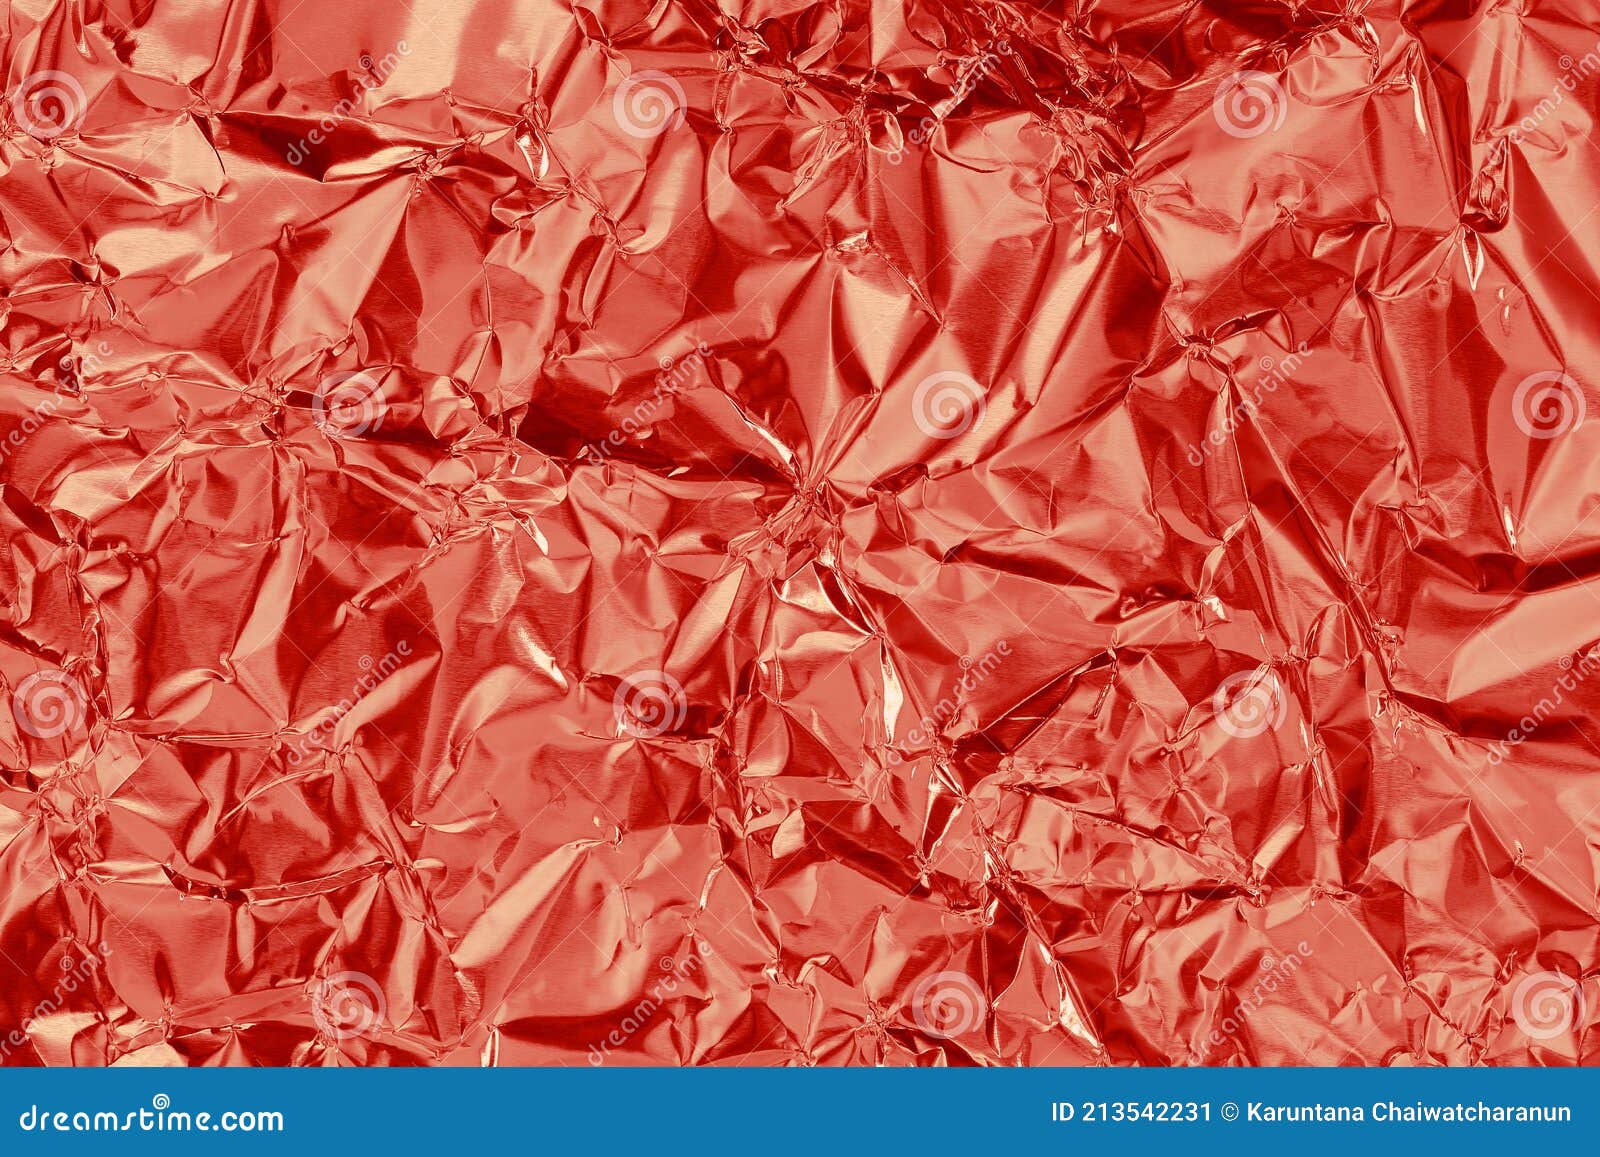 https://thumbs.dreamstime.com/z/shiny-red-foil-texture-background-pattern-wrapping-paper-crumpled-wavy-213542231.jpg